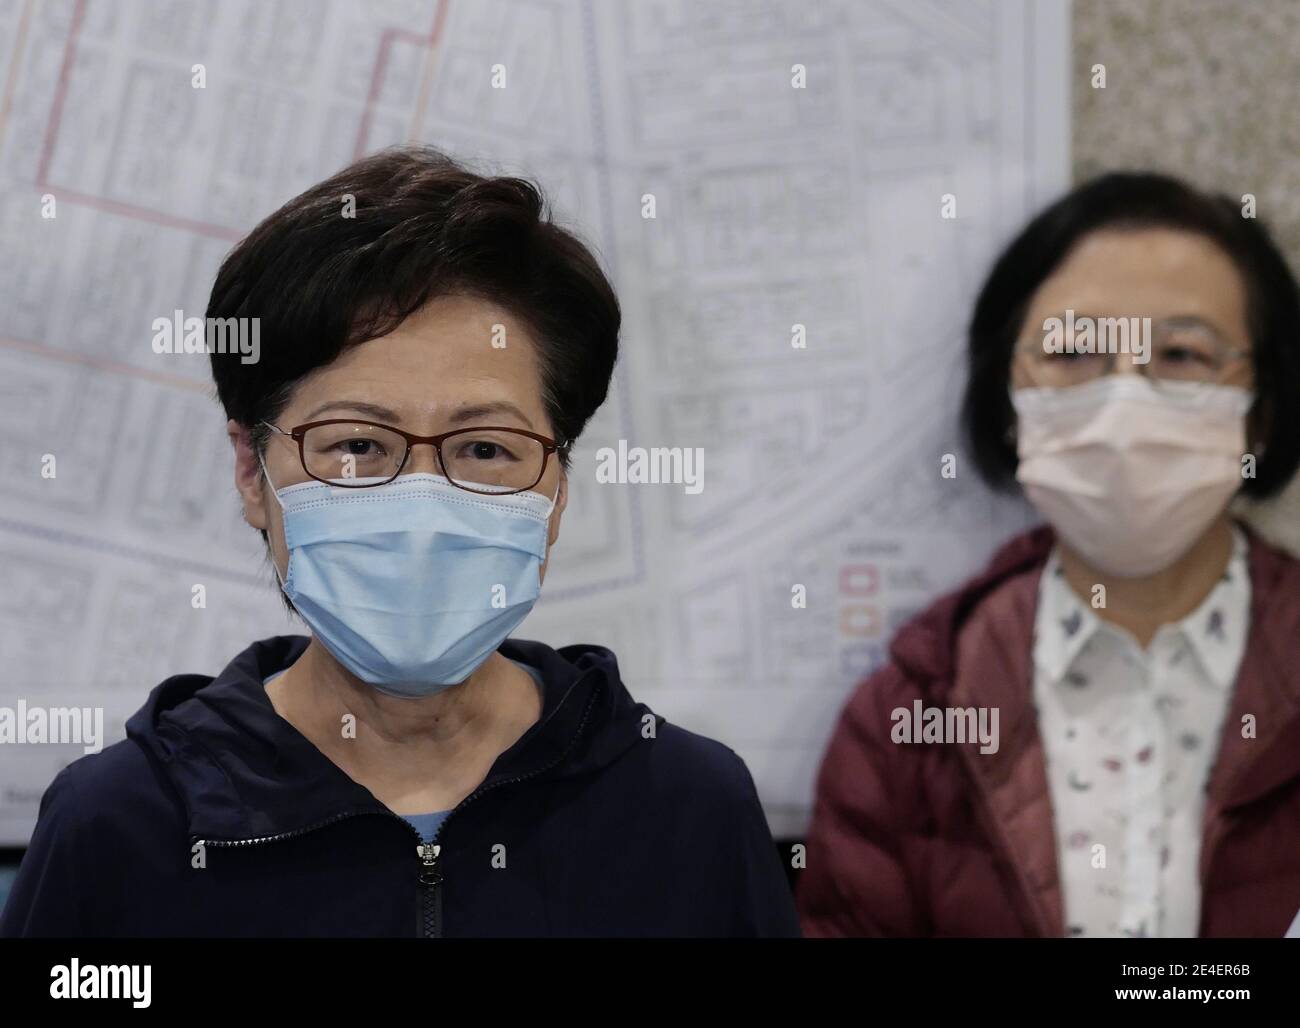 Hong Kong, China. 23rd Jan, 2021. Chief Executive of the Hong Kong Special Administrative Region Carrie Lam (L) speaks during an interview after her inspection tour in a virus-stricken area in Kowloon, Hong Kong, south China, Jan. 23, 2021. TO GO WITH 'Roundup: A year after 1st case found, Hong Kong's COVID-19 tally surpasses 10,000' Credit: Wang Shen/Xinhua/Alamy Live News Stock Photo